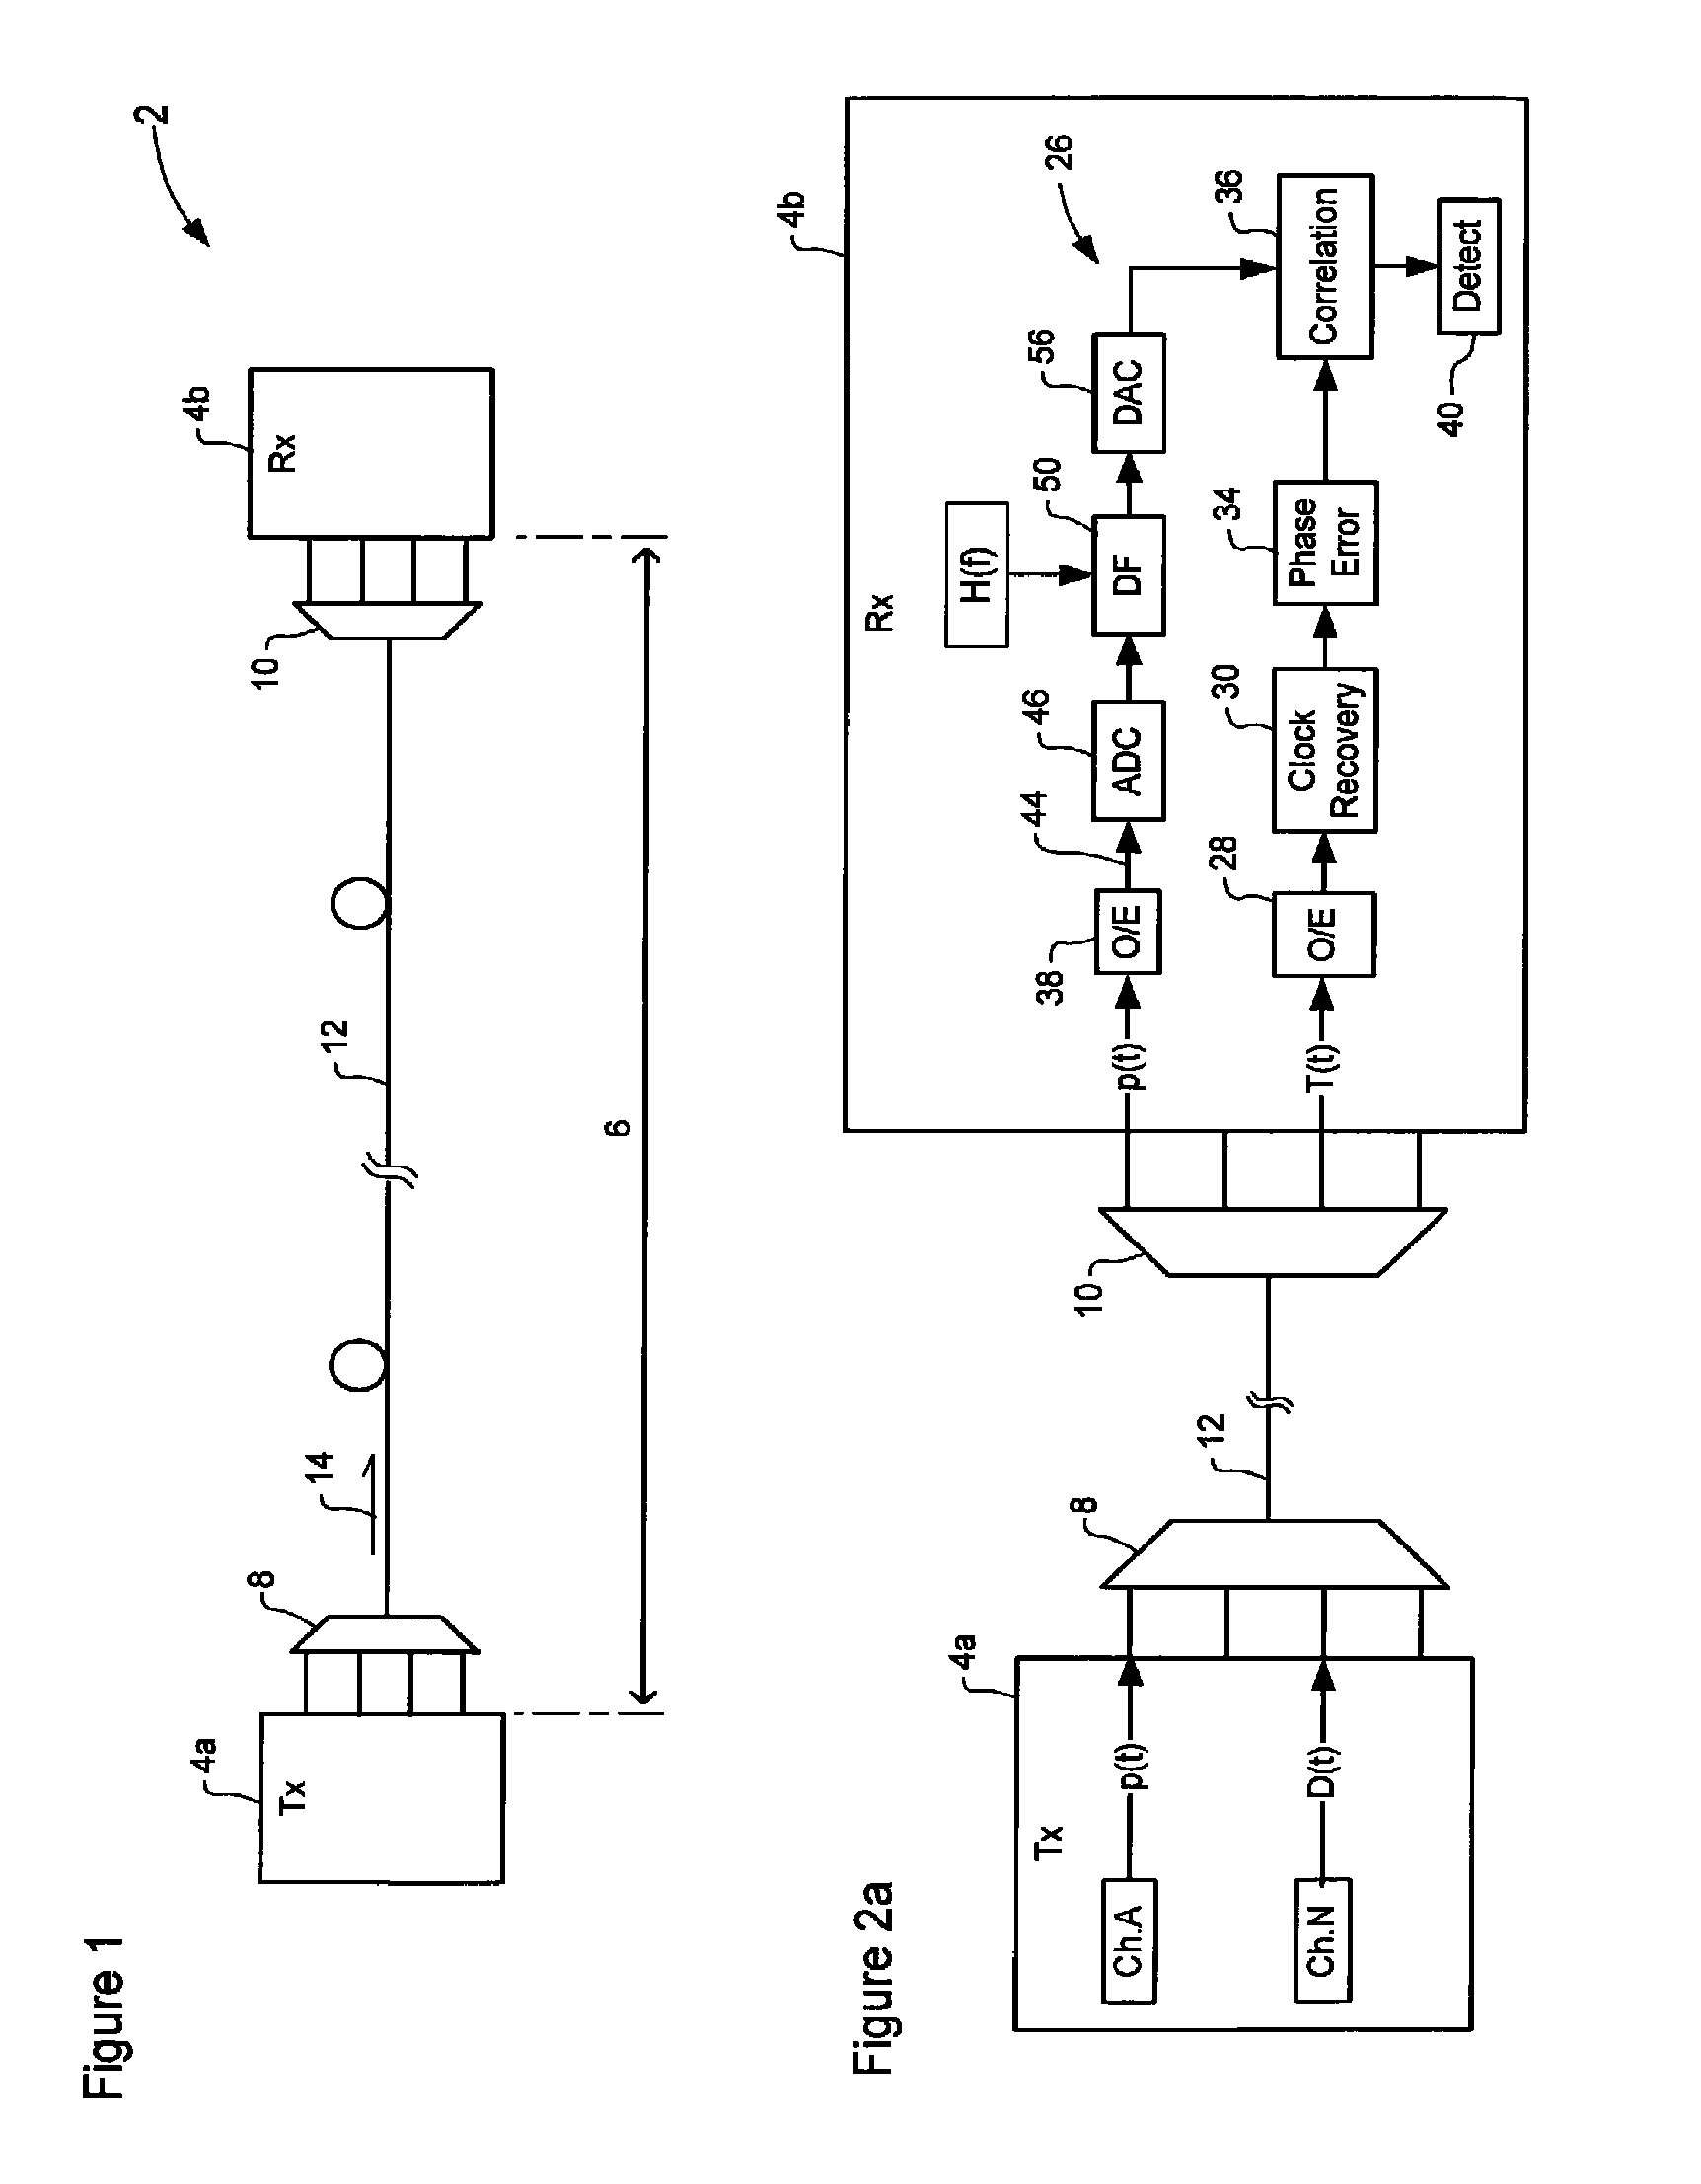 Monitoring phase non-linearities in an optical communication system